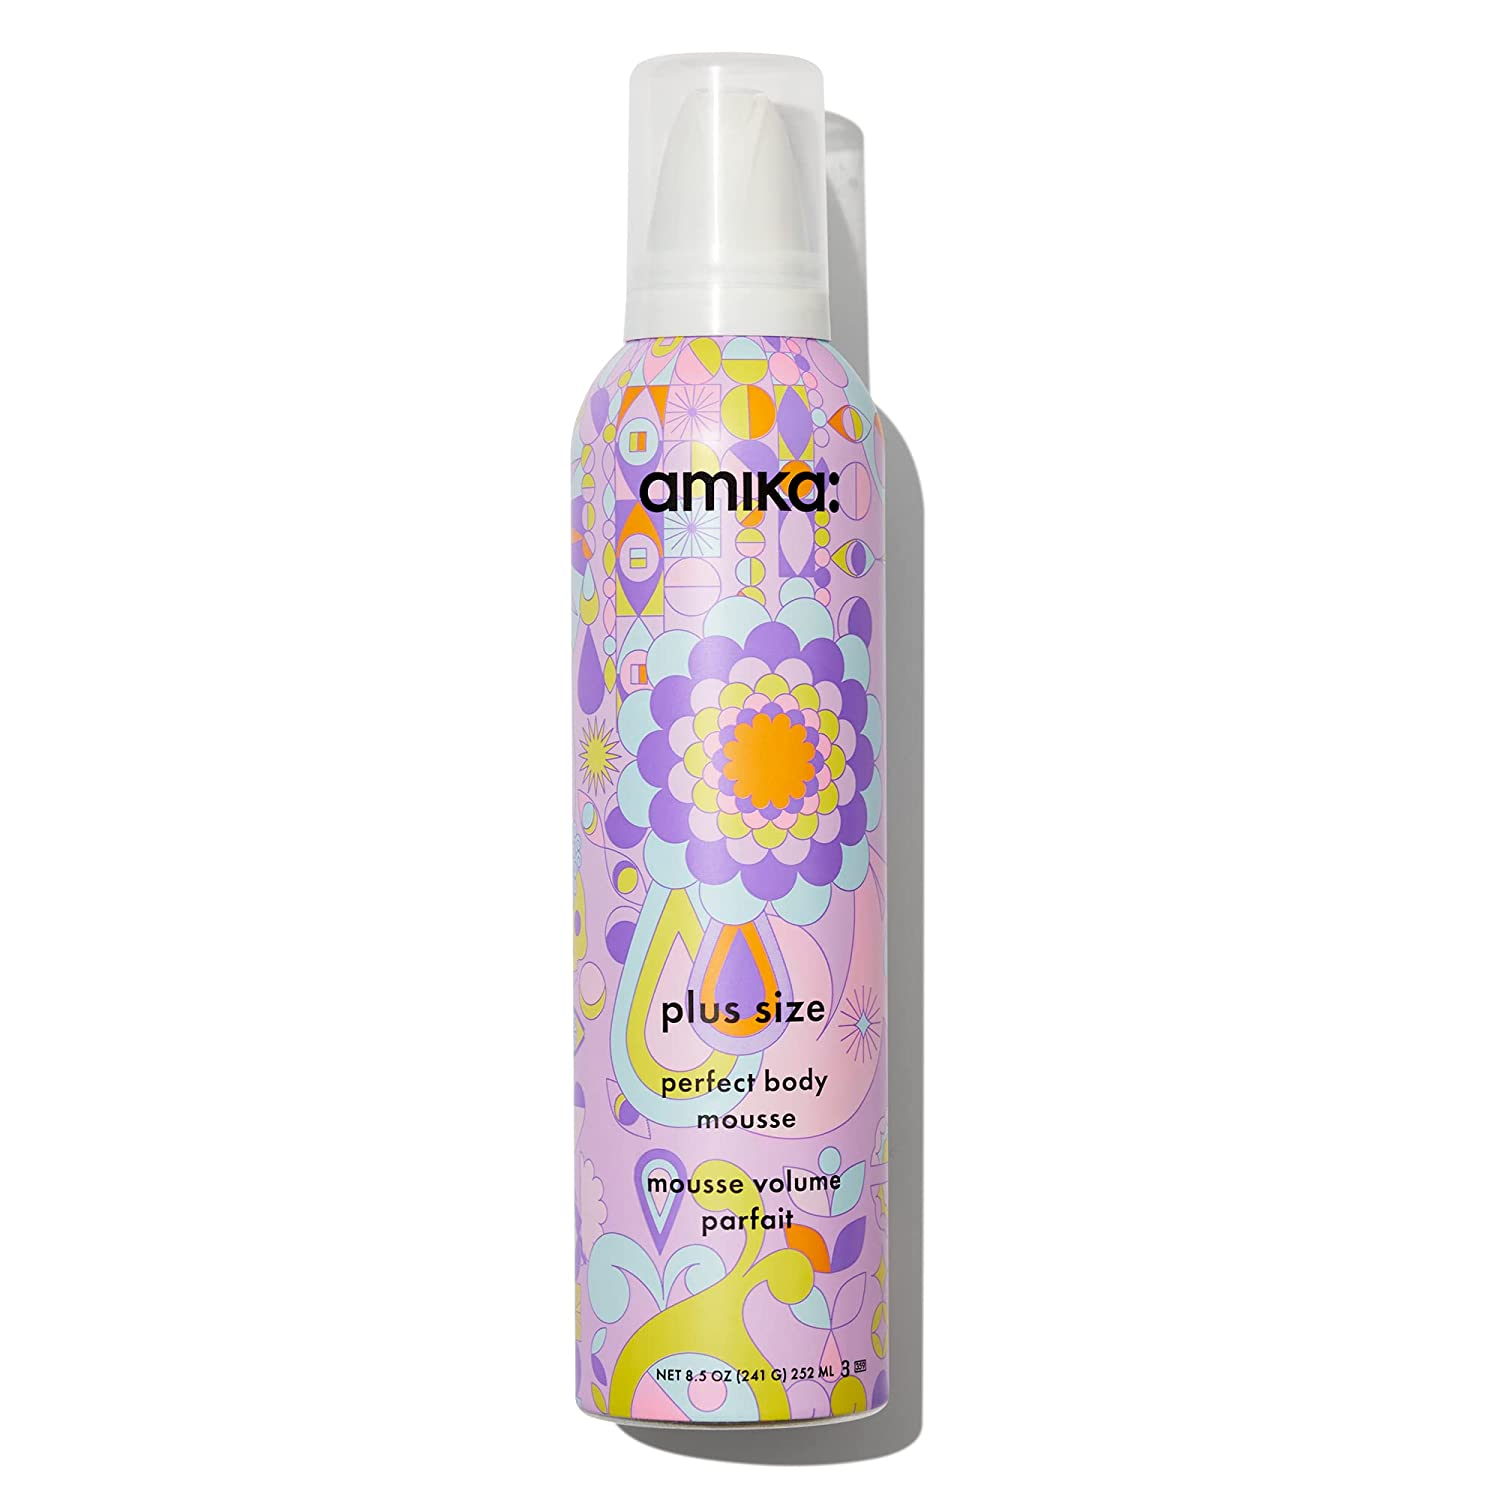 Primary image for Amika Plus Size Perfect Body Mousse, 8.5 Oz.